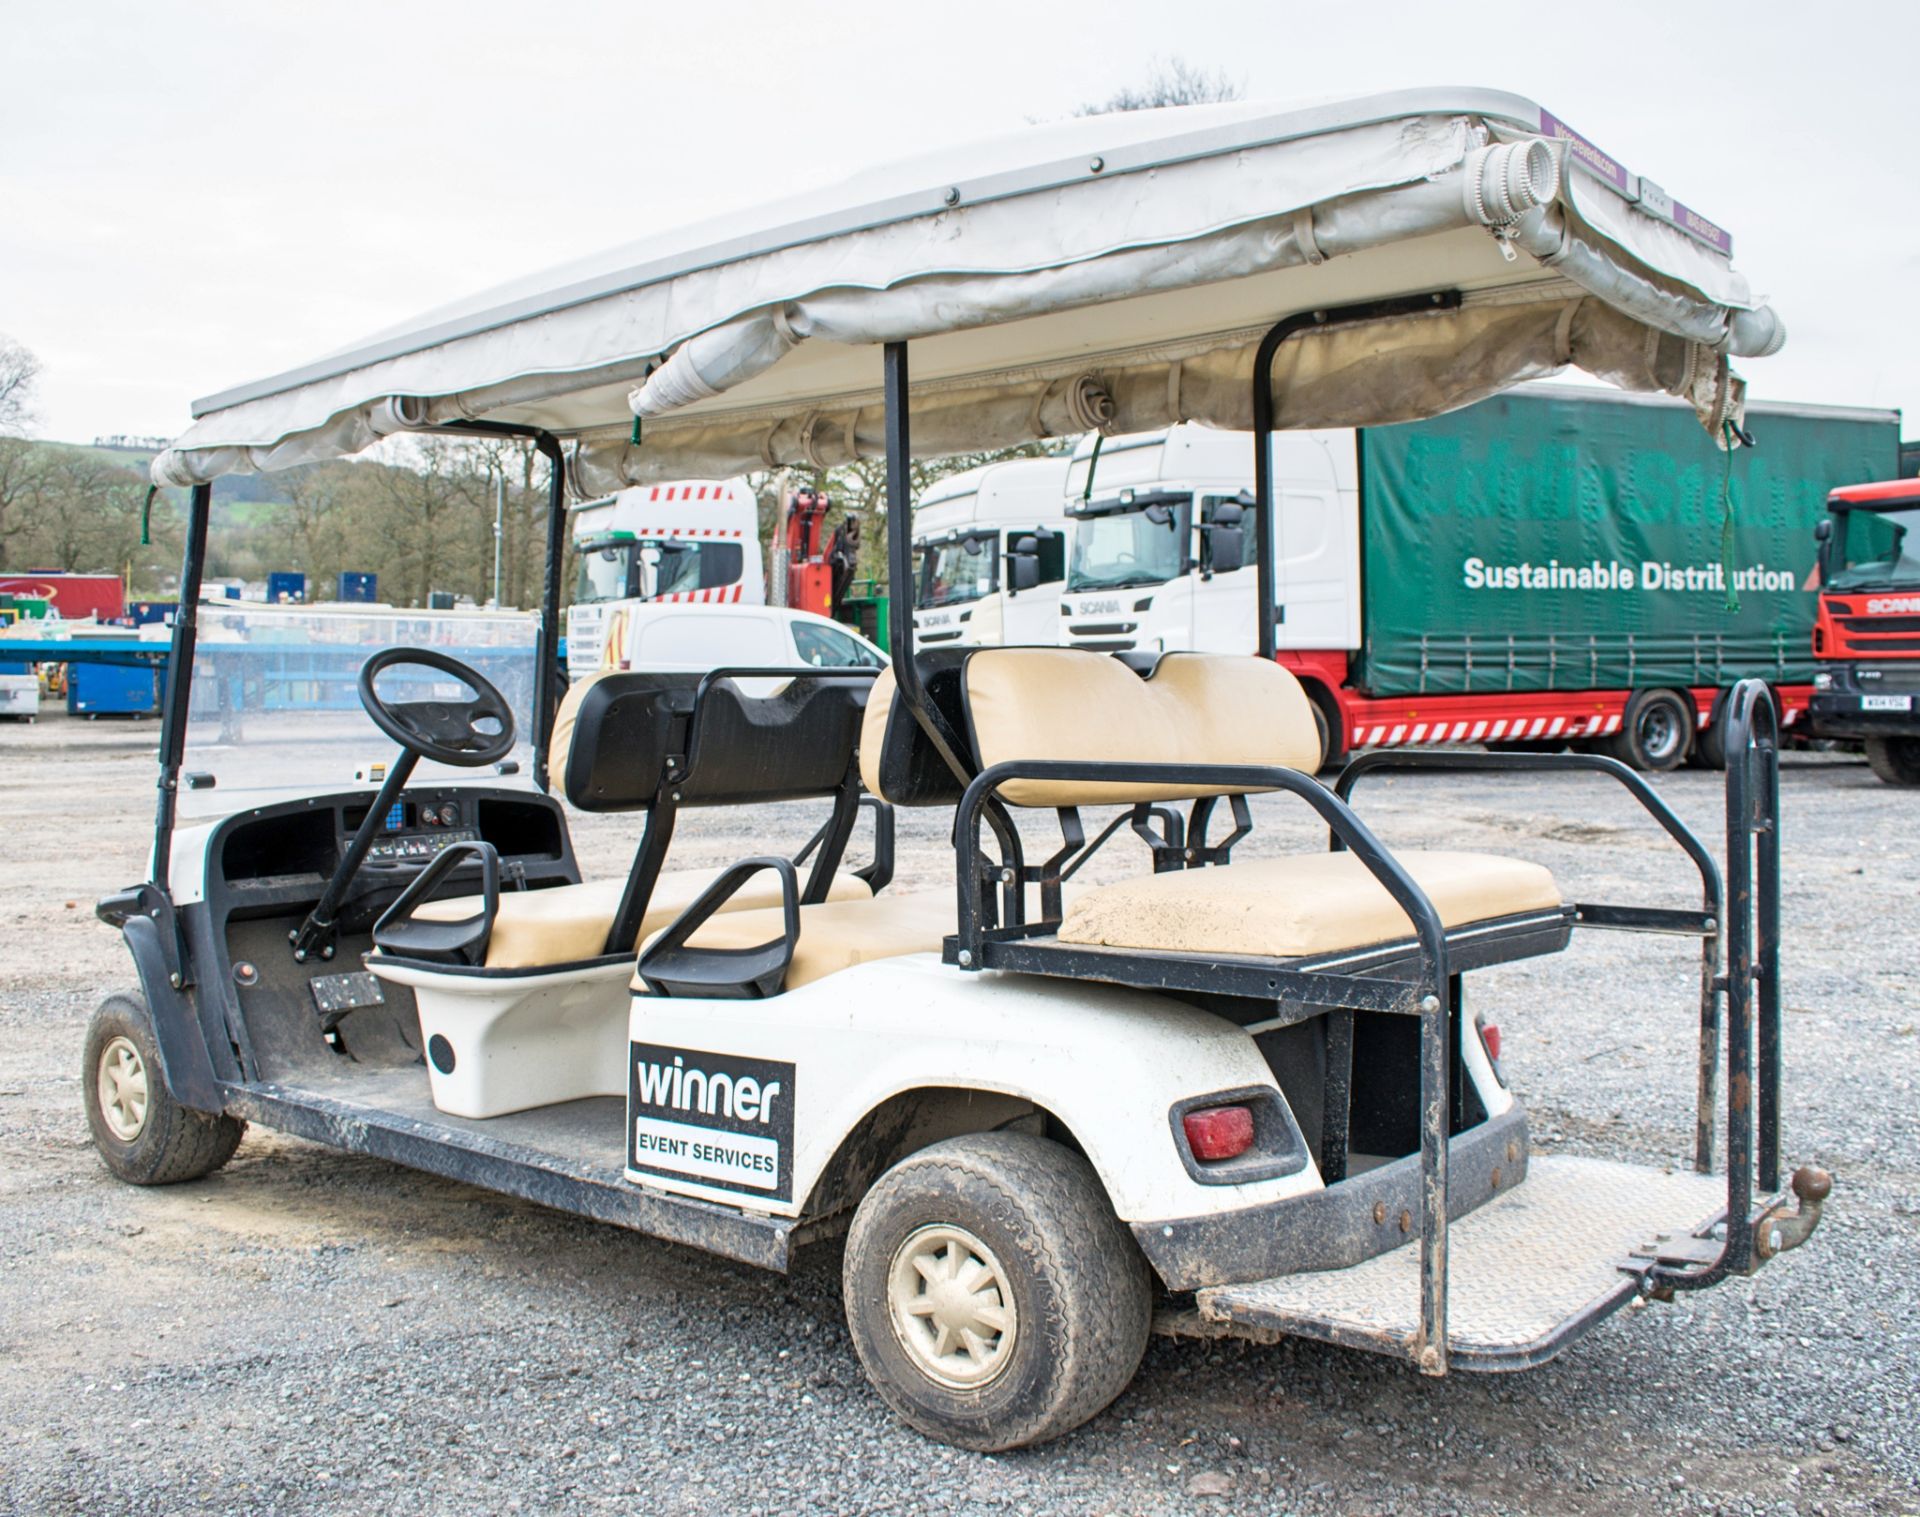 Cushman 6 seat petrol driven golf buggy Year: 2012 S/N: 281245 Recorded Hours: 0184 - Image 4 of 8